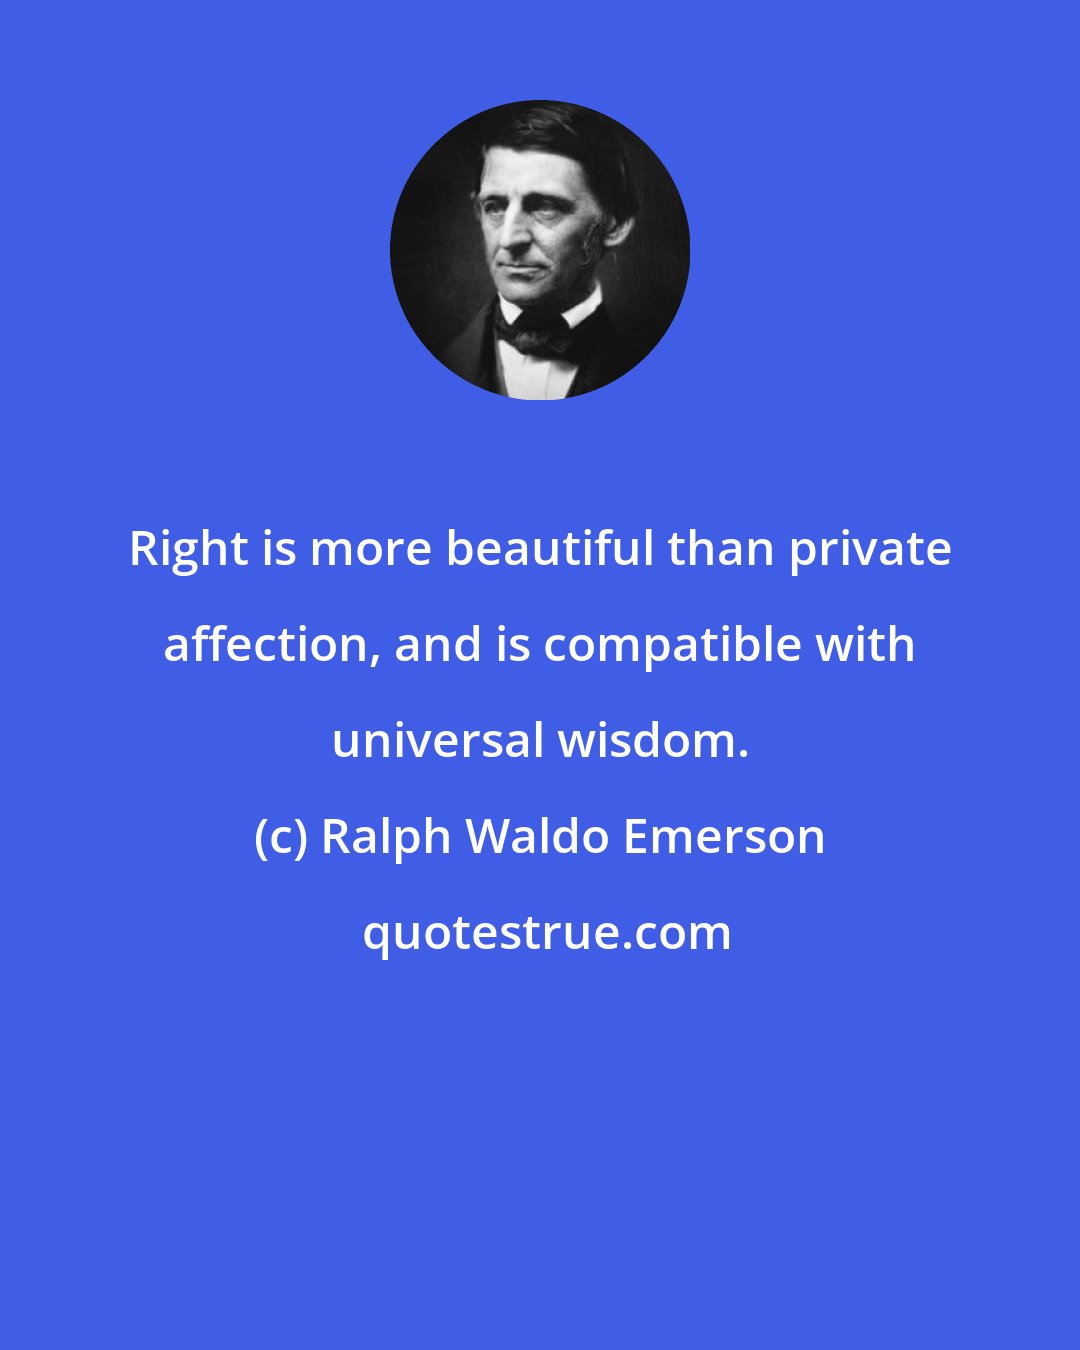 Ralph Waldo Emerson: Right is more beautiful than private affection, and is compatible with universal wisdom.